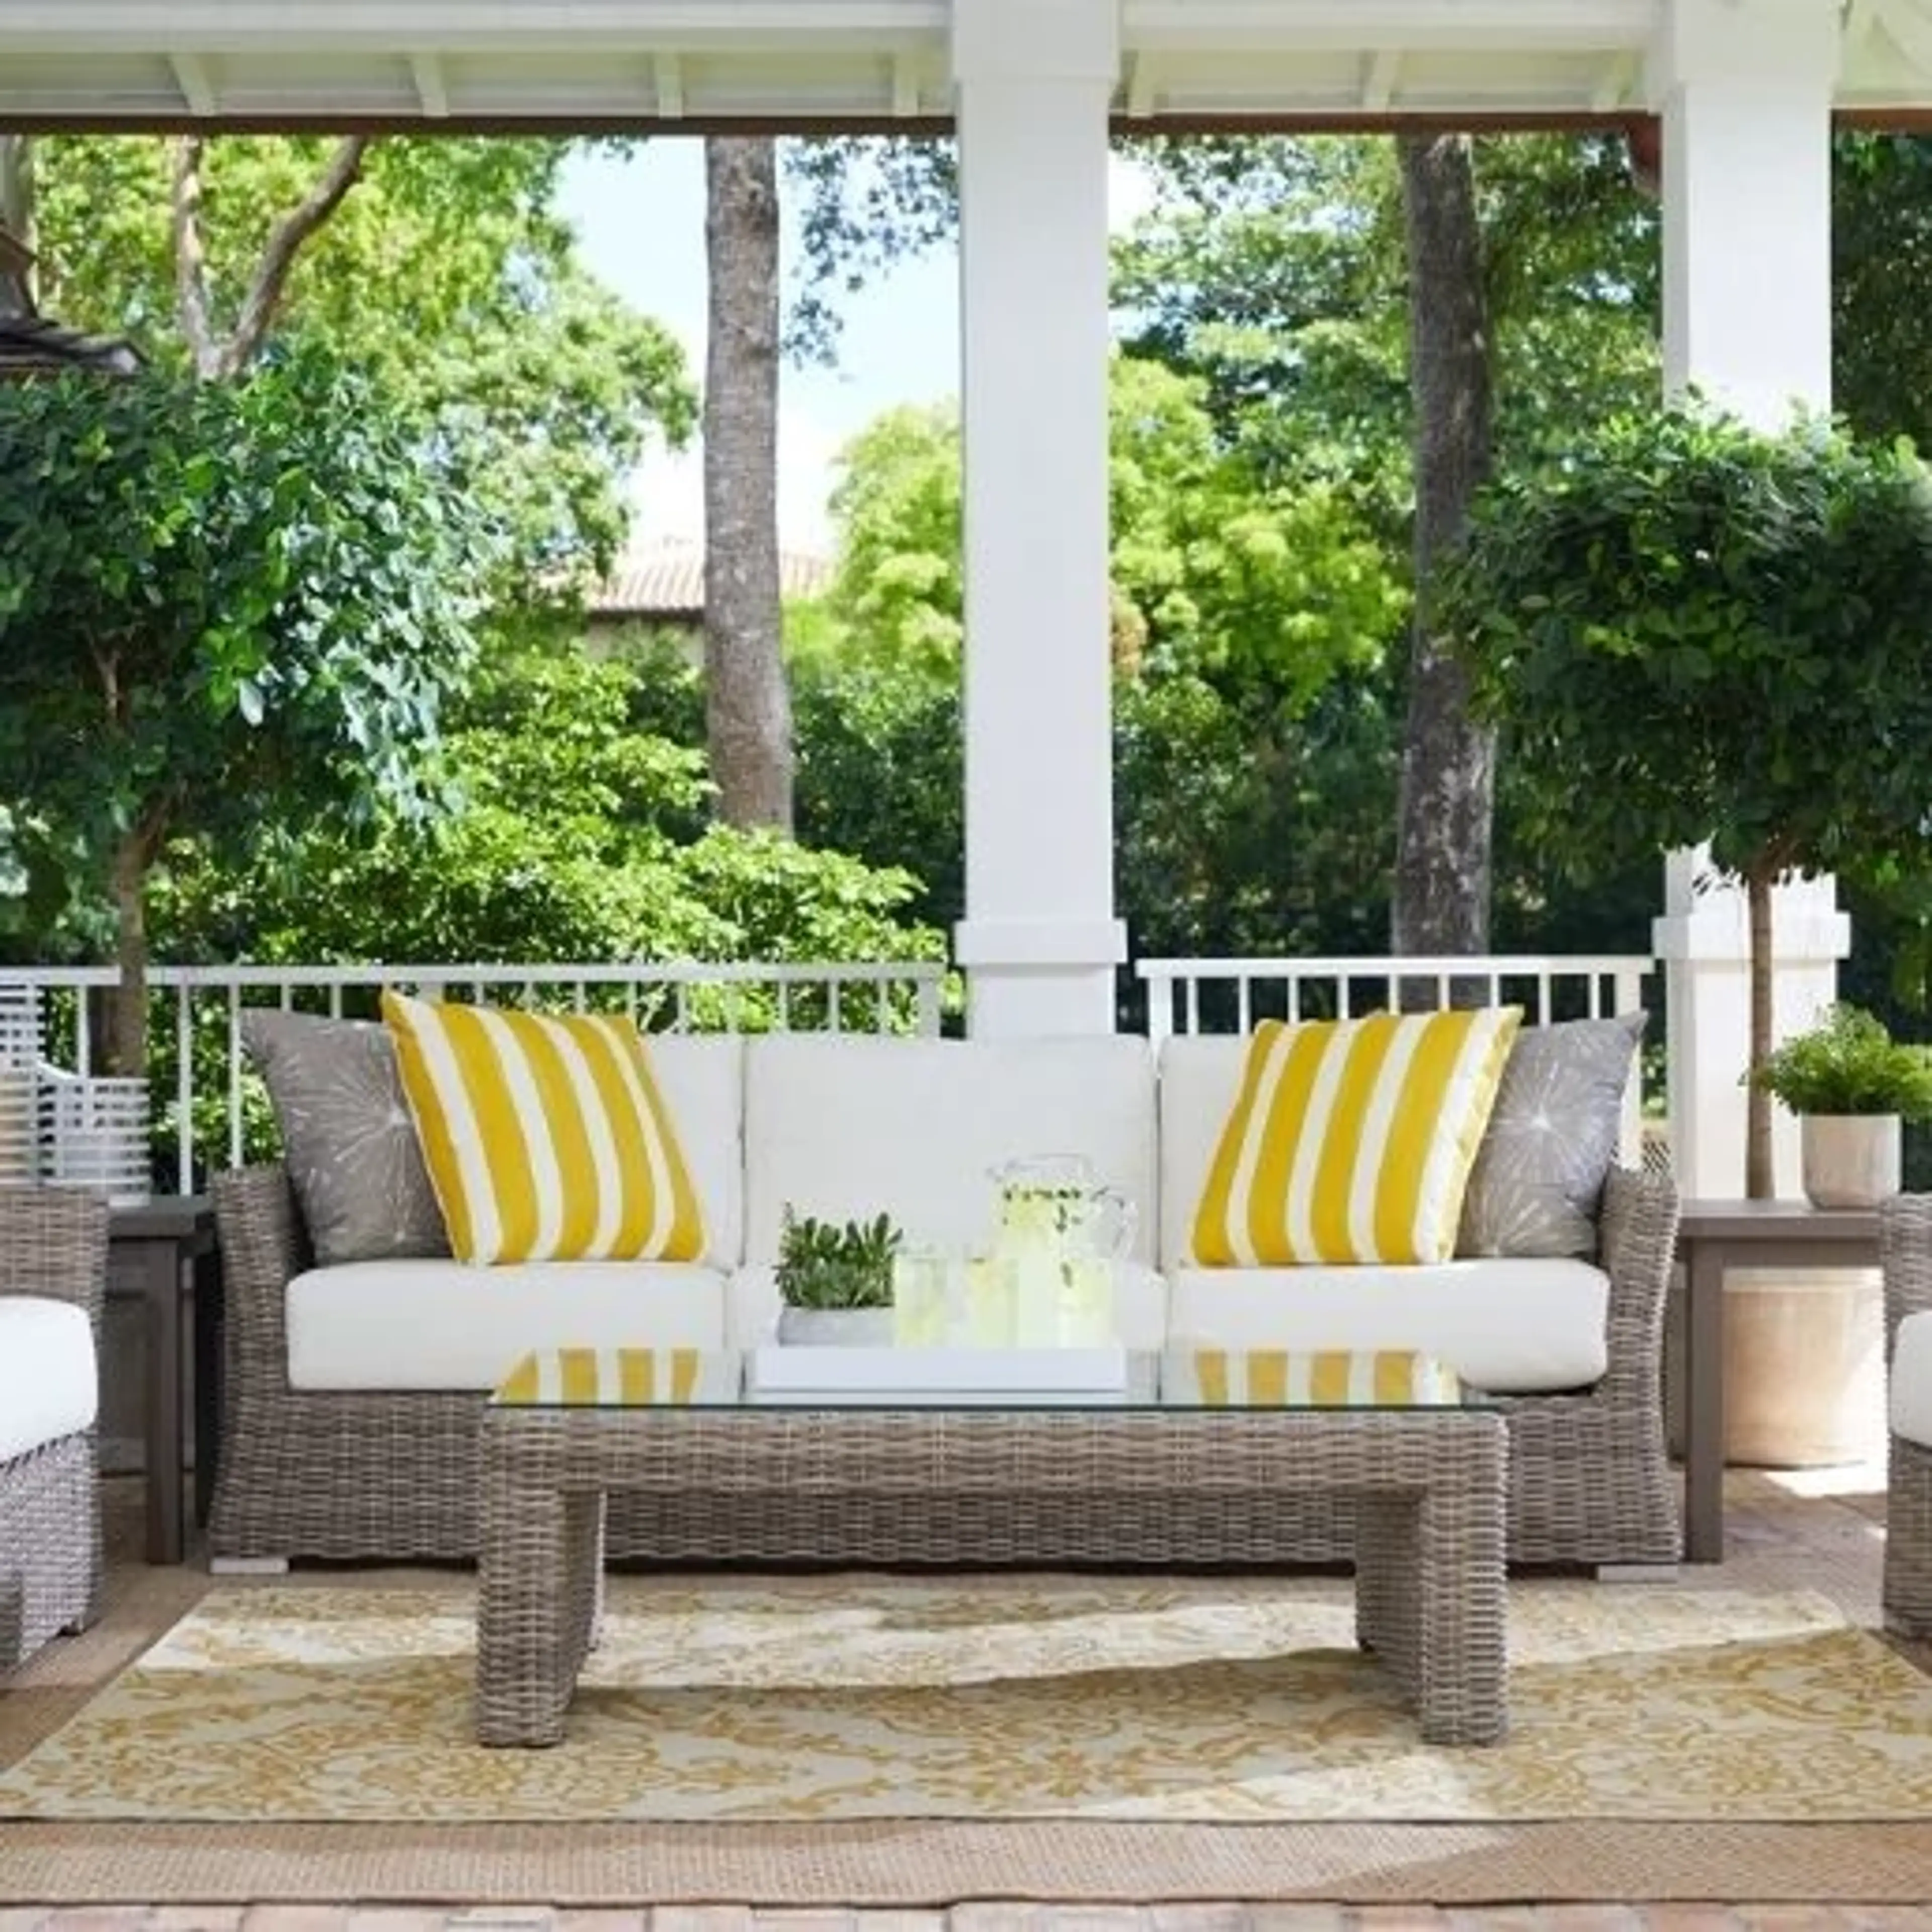 Embrace Elegance with Exquisite Wicker Furniture